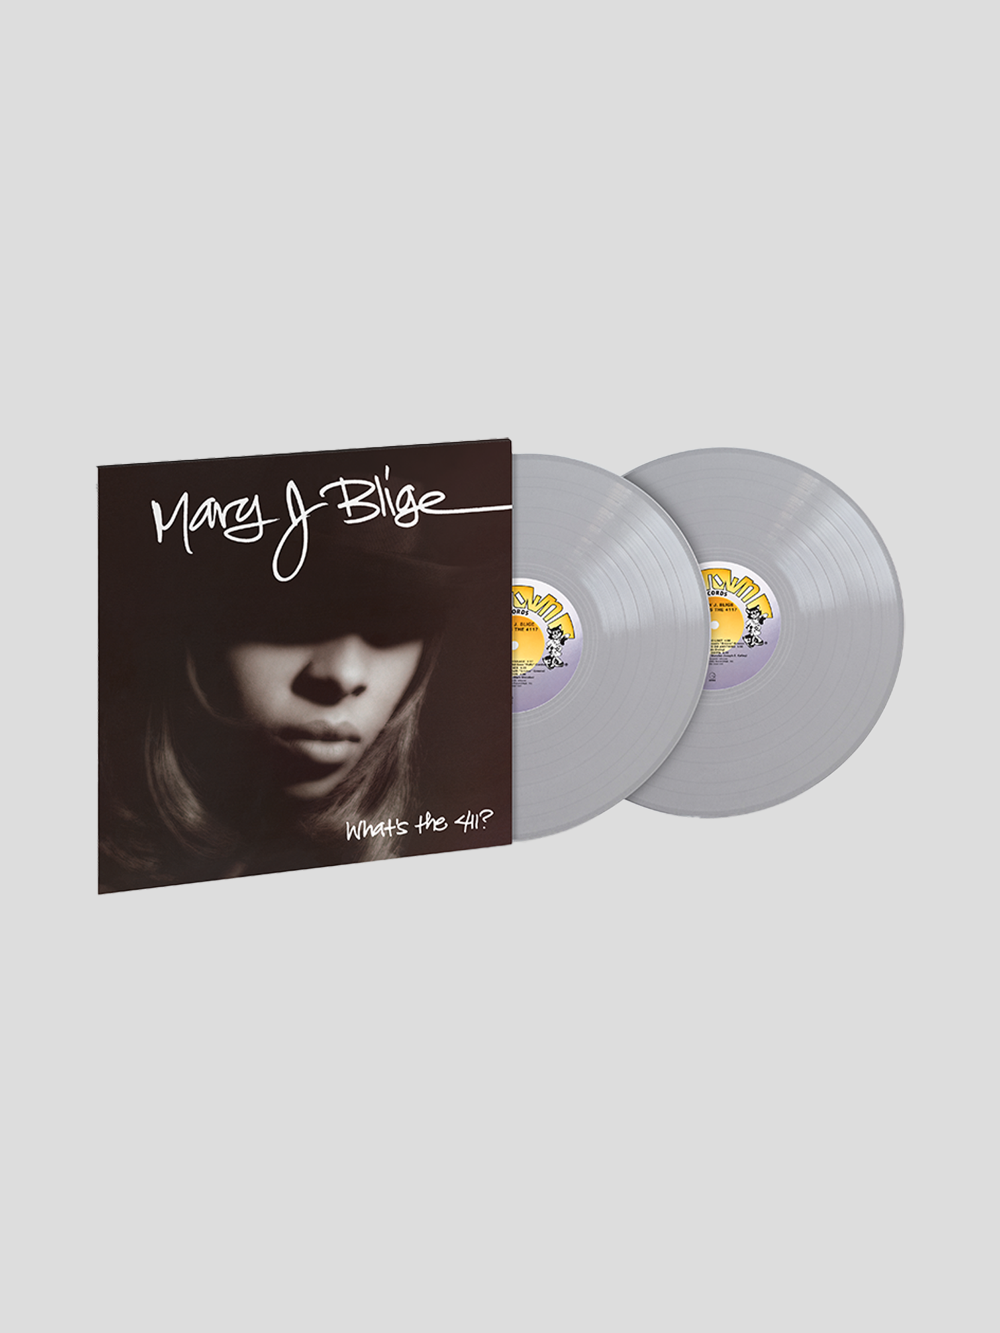 What's the 411? 2LP (Limited Edition) - Mary J. Blige Official Store